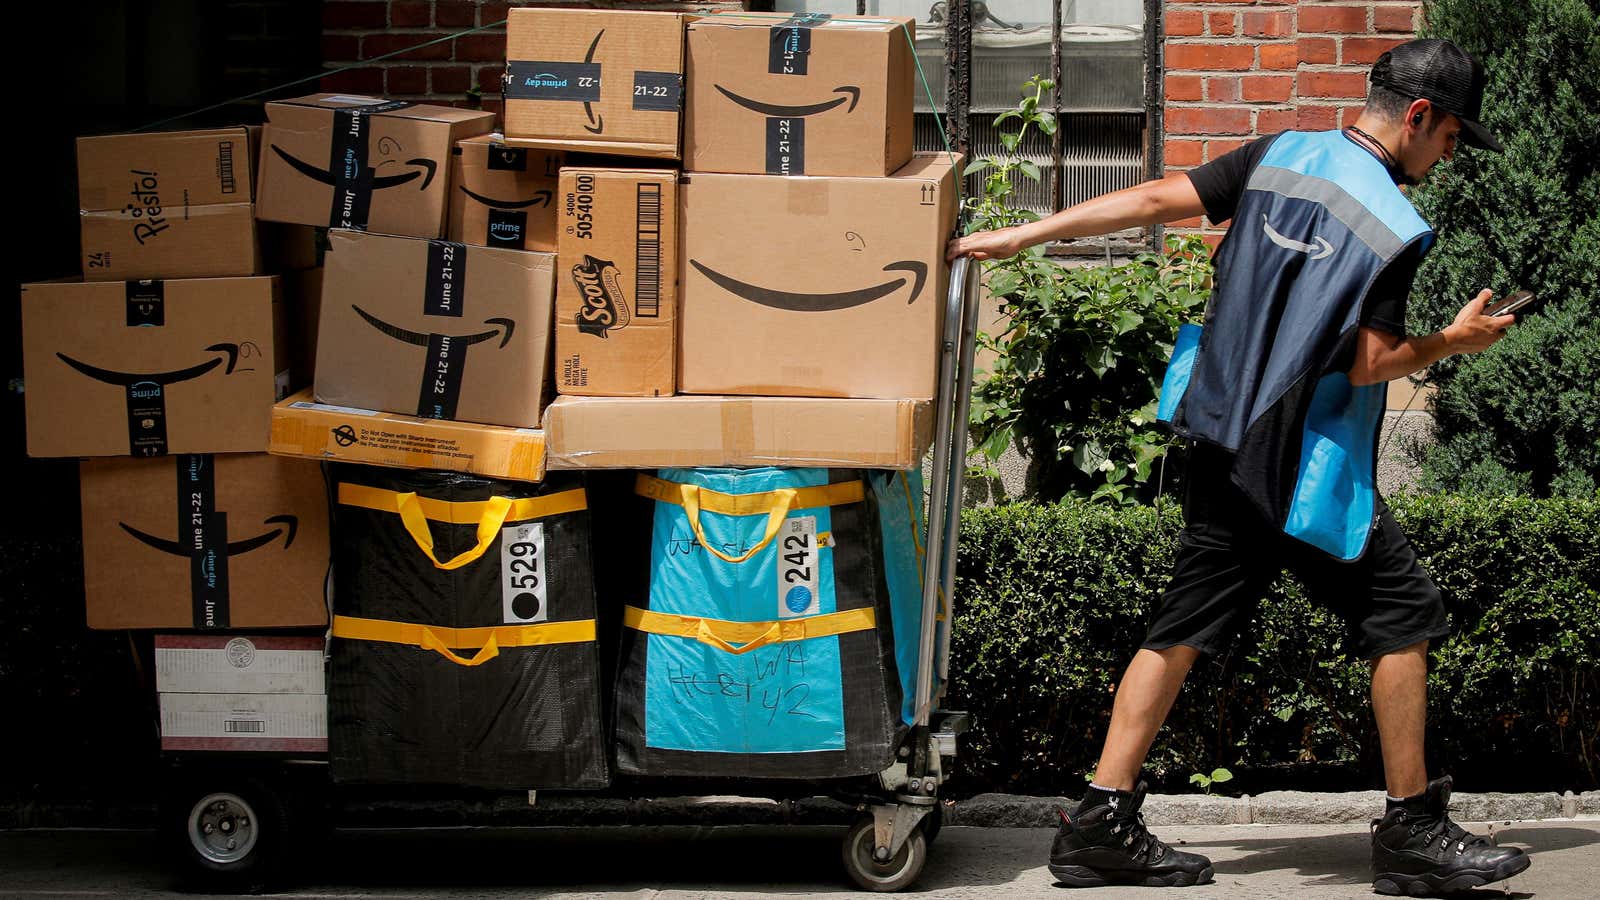 Amazon is within an hour of most Americans but still trails well behind Walmart in its physical proximity to the US population.